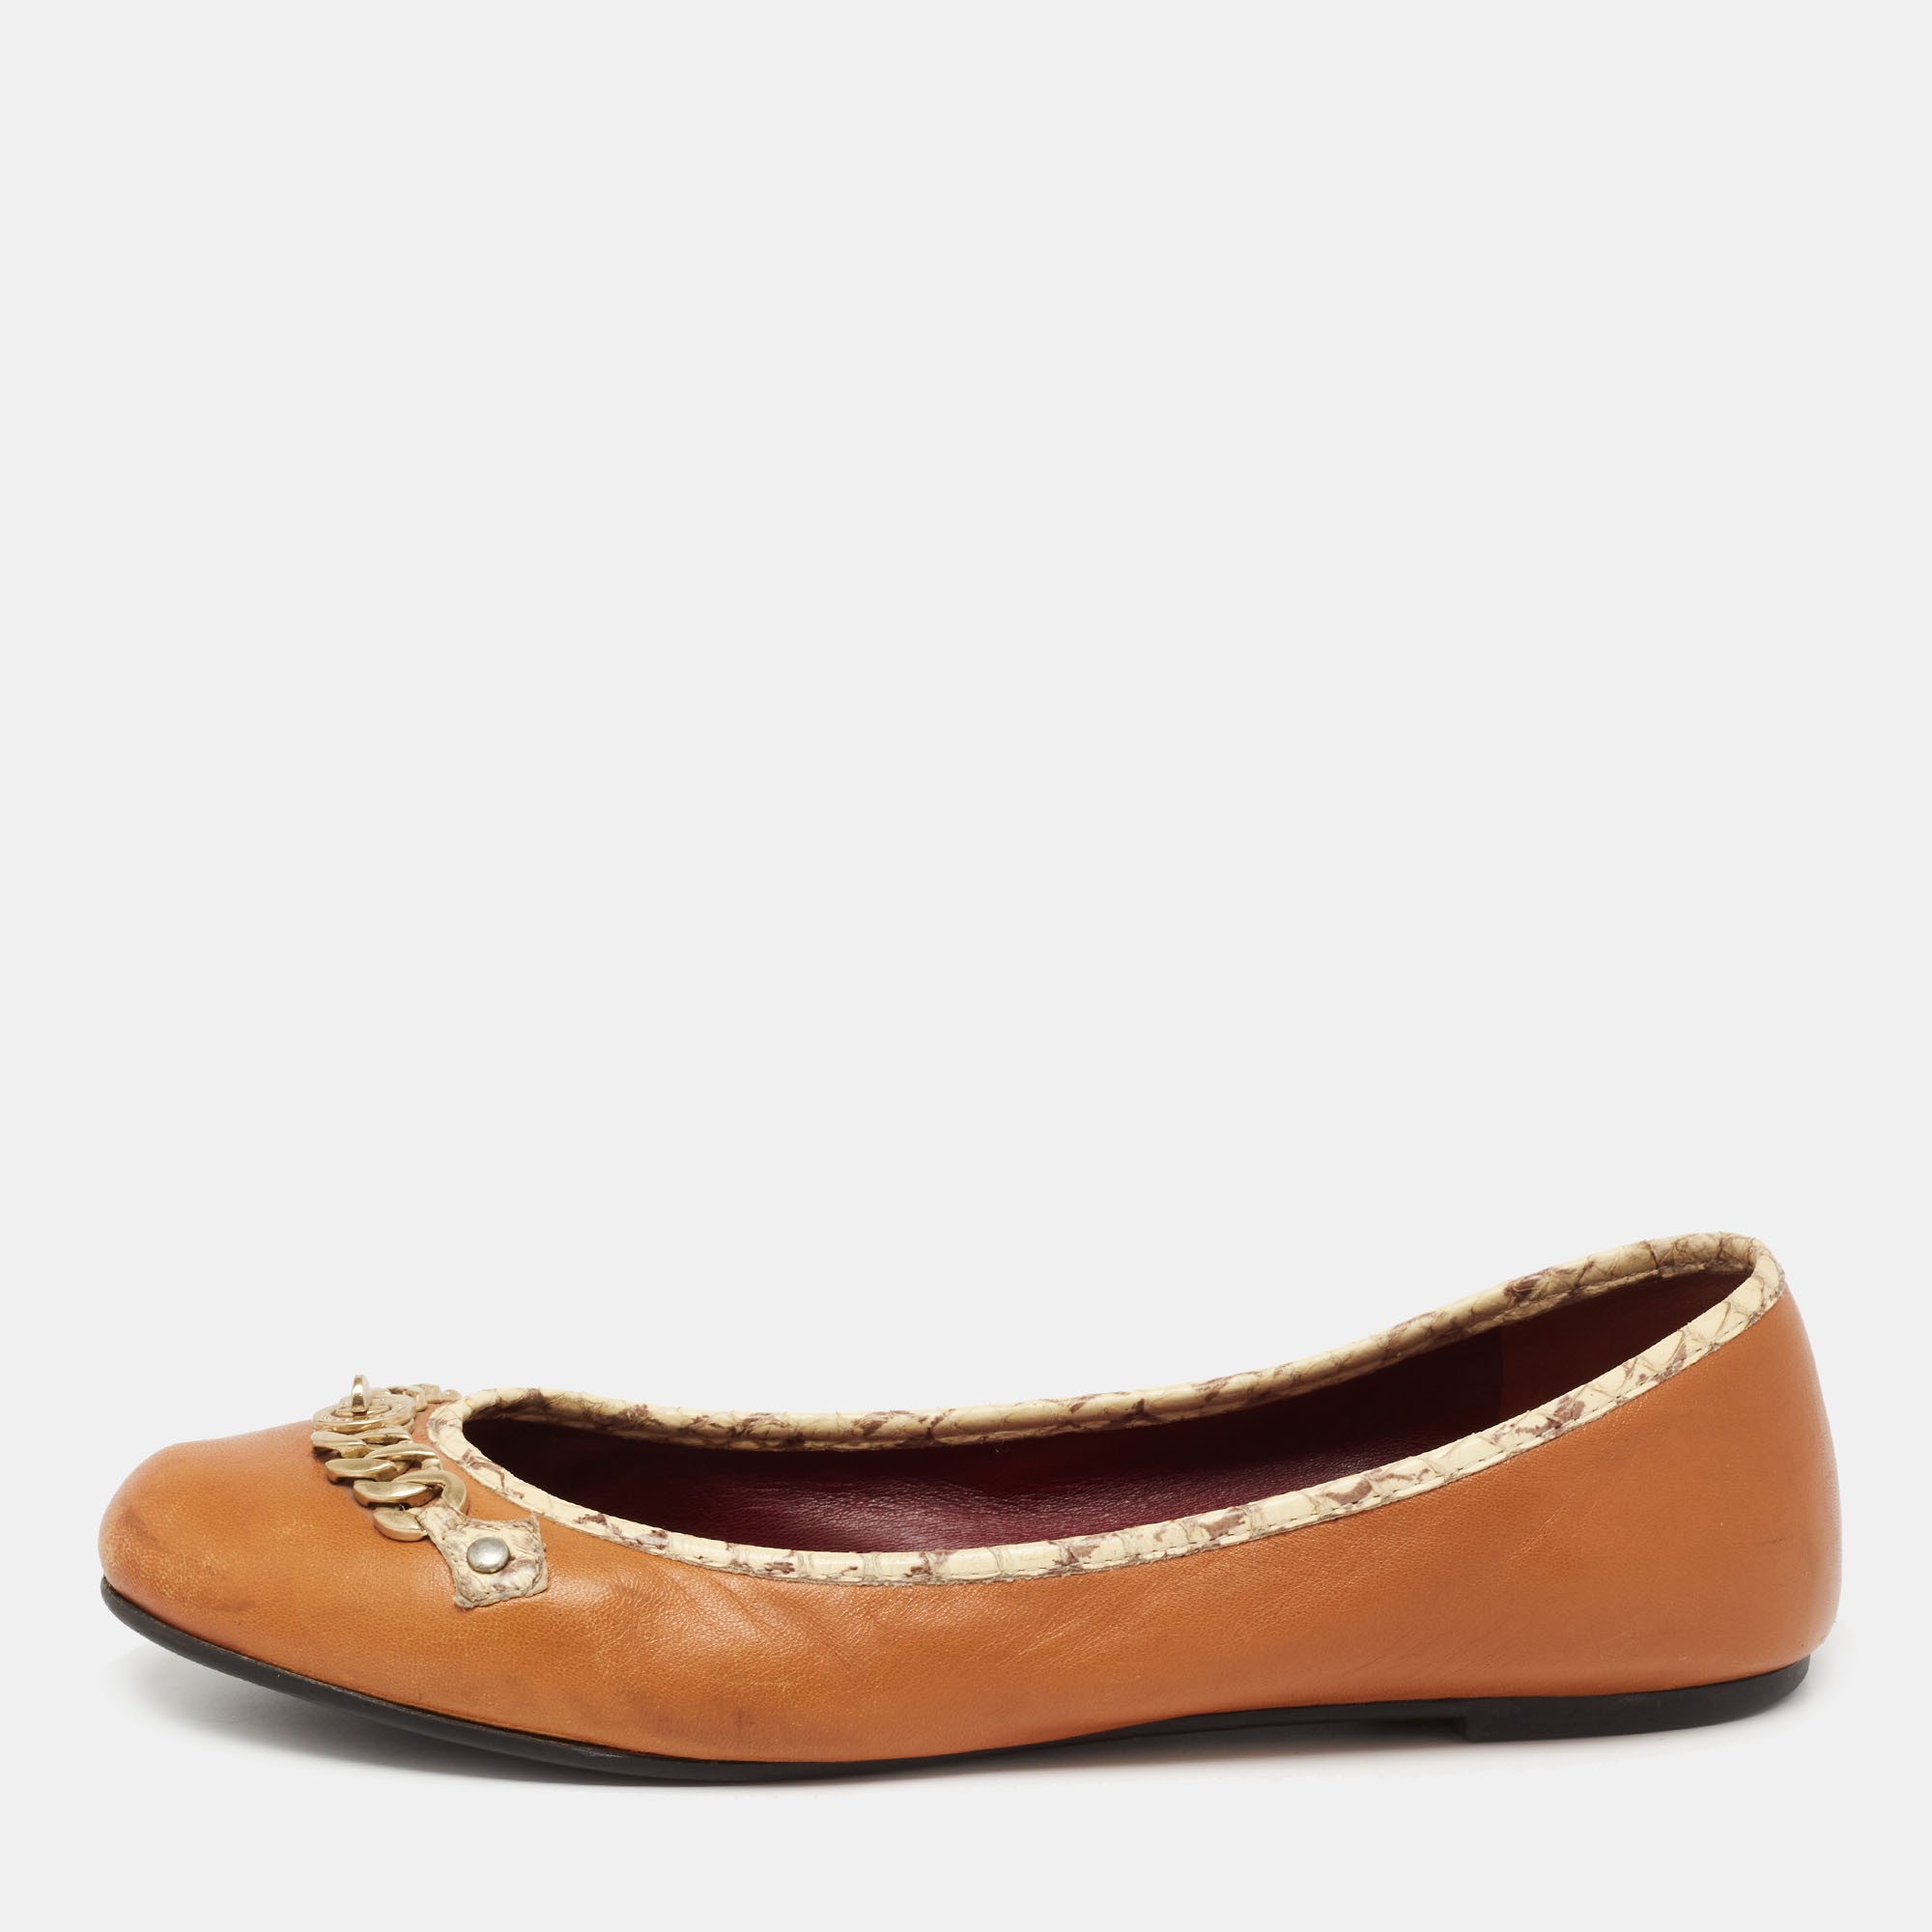 Marc By Marc Jacobs Tan Leather Chain Detail Ballet Flats Size 38.5